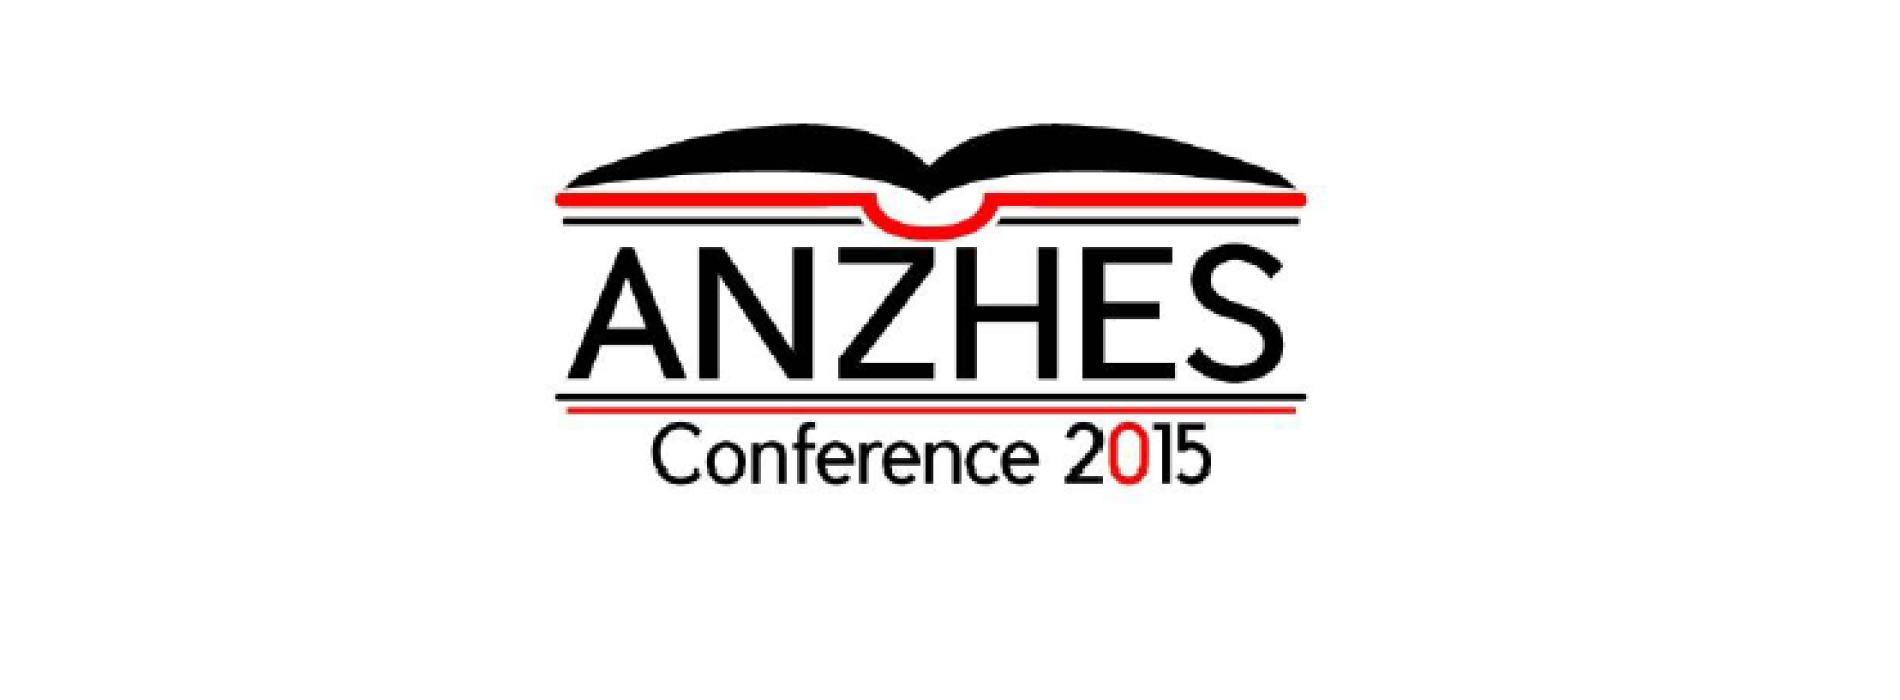 Call for Papers: ANZHES Conference 4-6 December 2015 (Wellington, New Zealand)